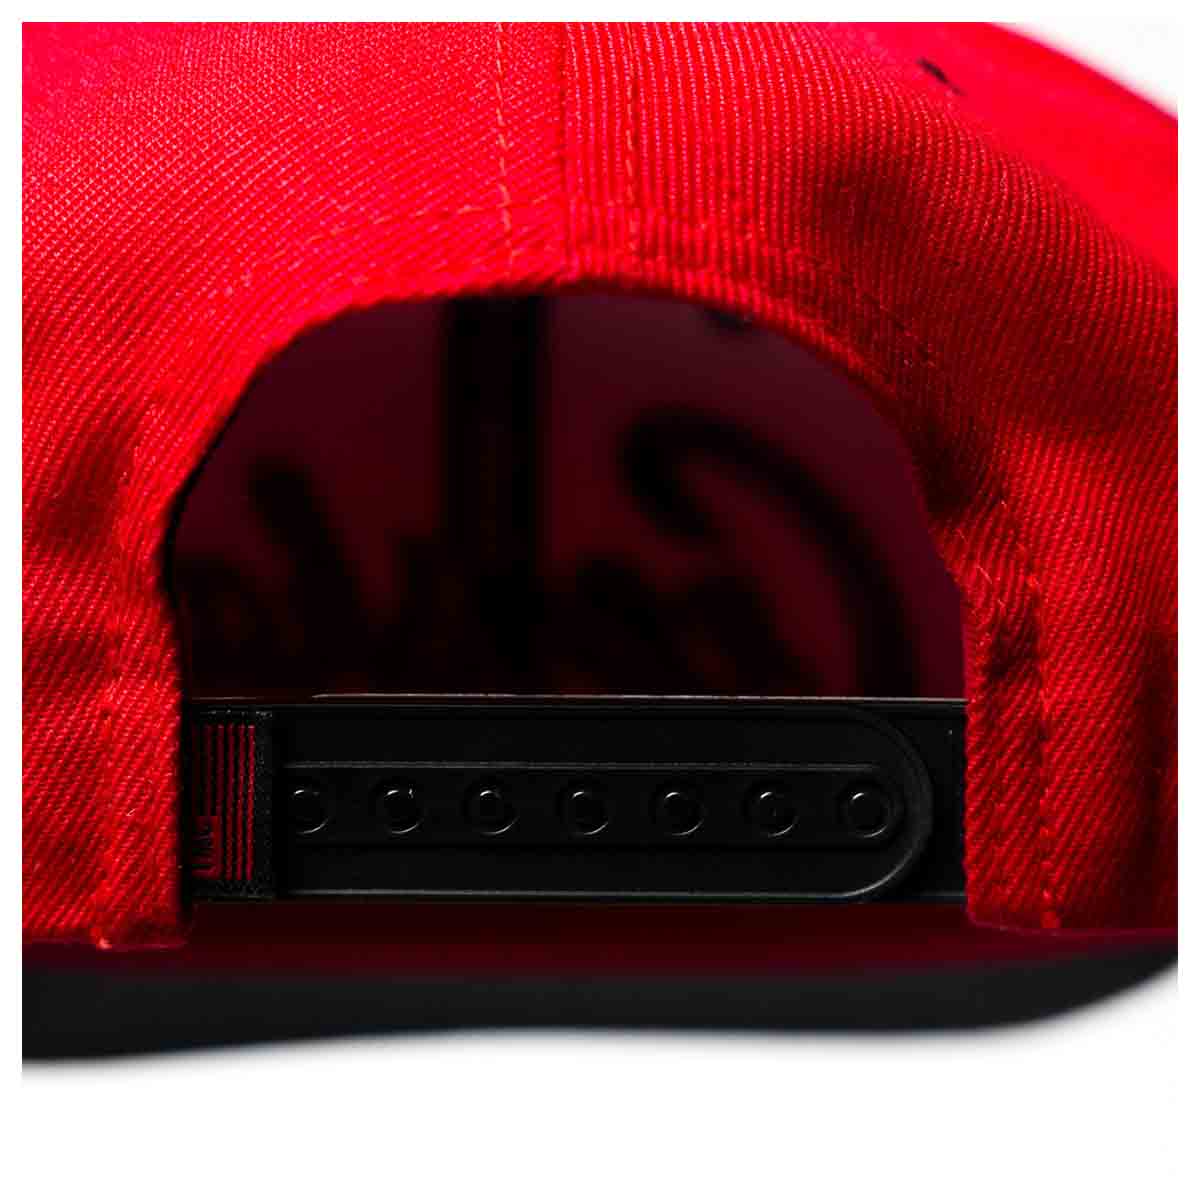 Crenshaw Limited Edition Snapback - Red/Black [Two-Tone]